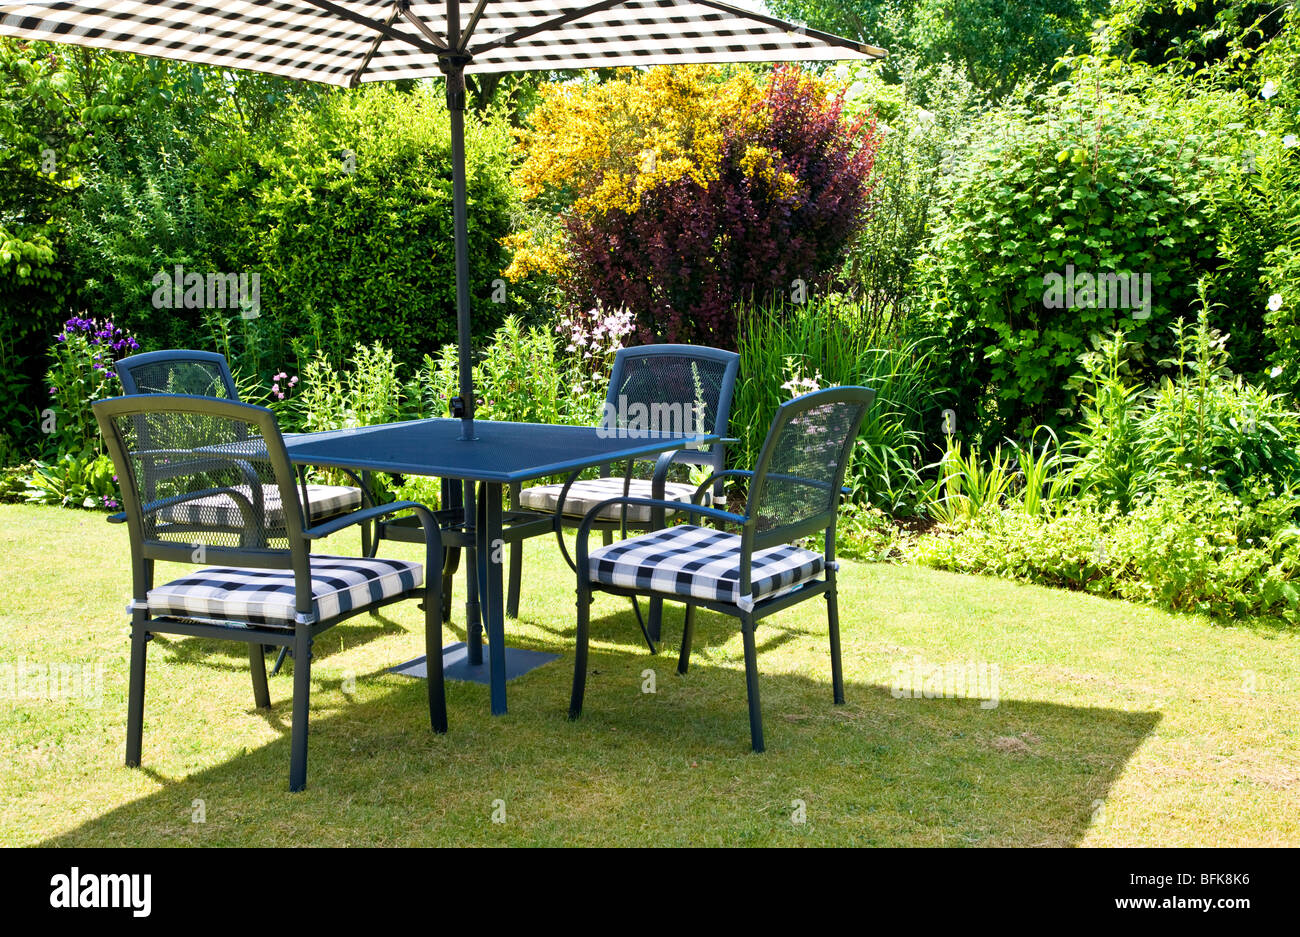 Contemporary garden furniture on the lawn in a typical English country or town garden on a sunny day in summer. Stock Photo